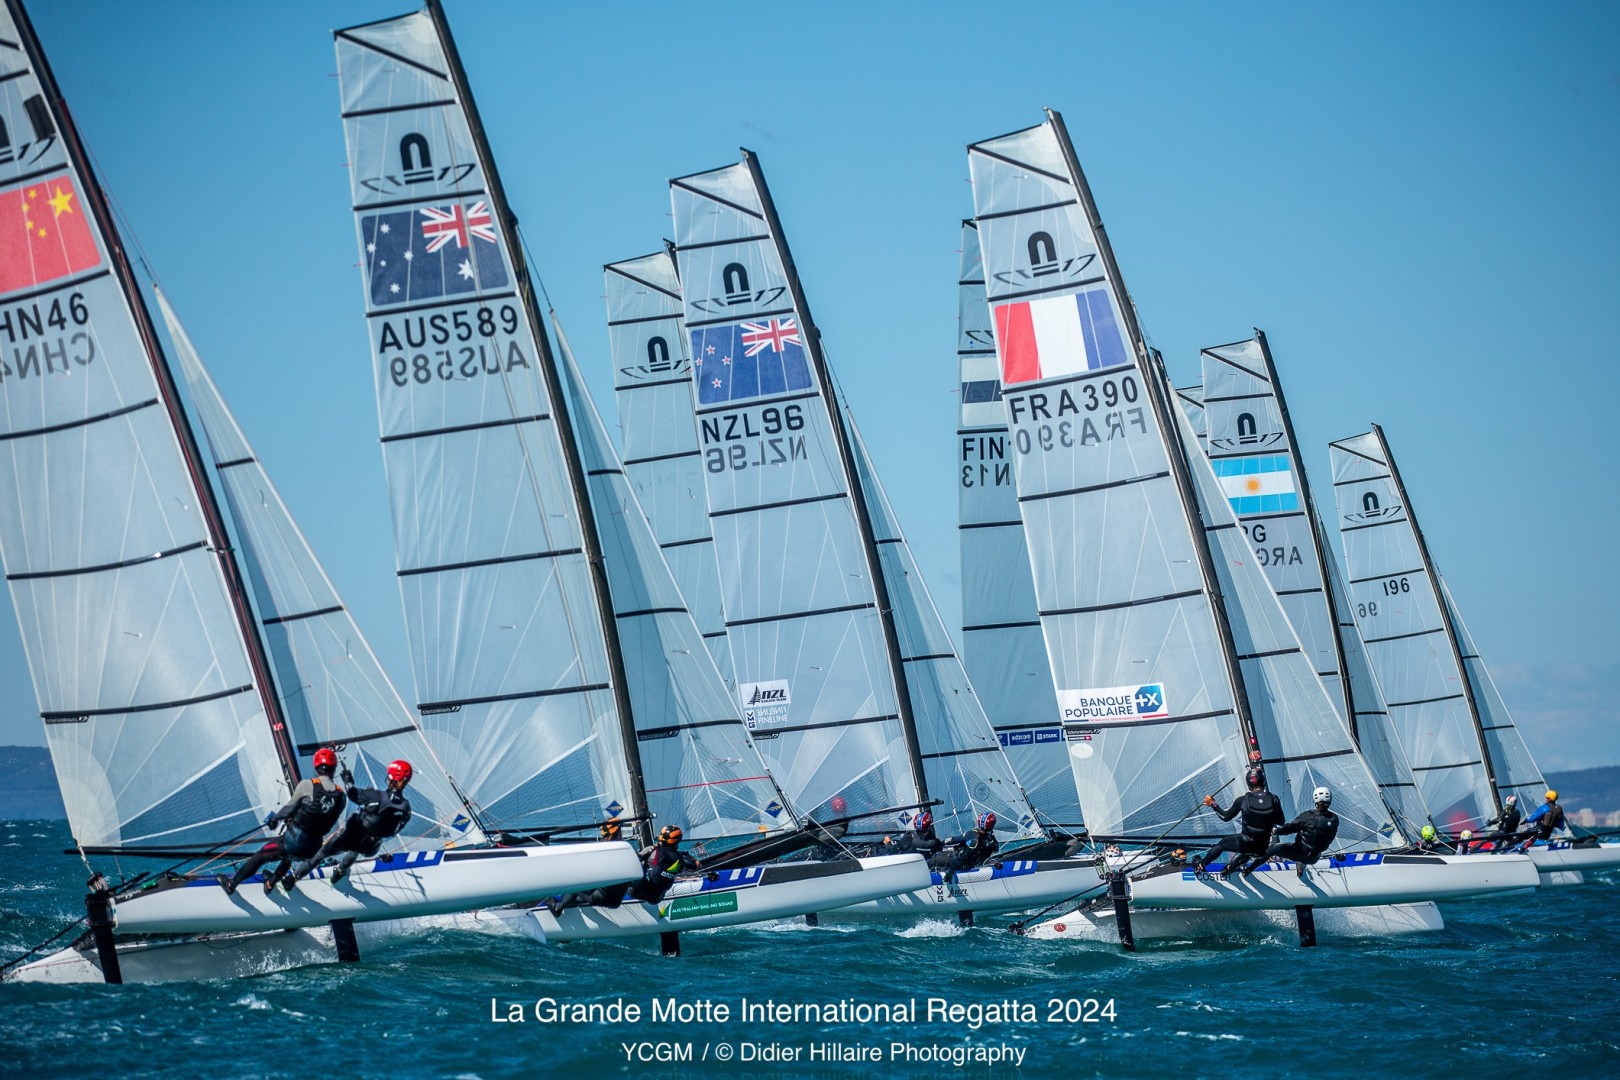 The Nacra 17 World Championship along with the 49er and 49erFX European Championships is attracting 148 teams to La Grande Motte in the South of France for six days of racing from 7 to 12 May.